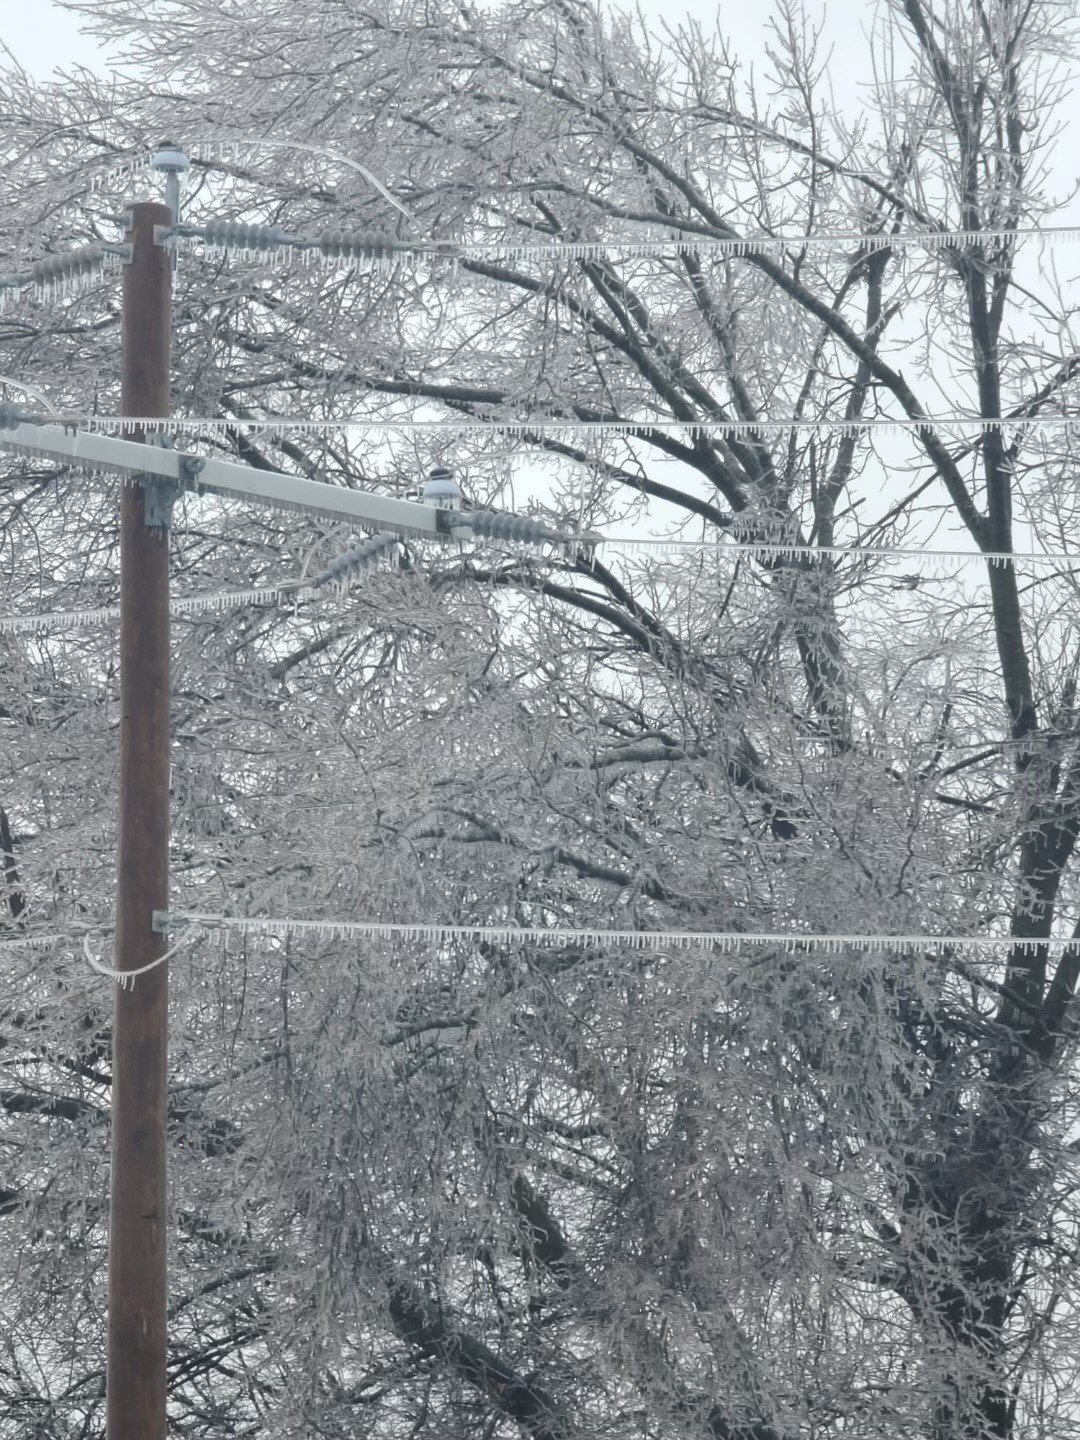 Ice forms on trees and power lines earlier today in Forrest City.